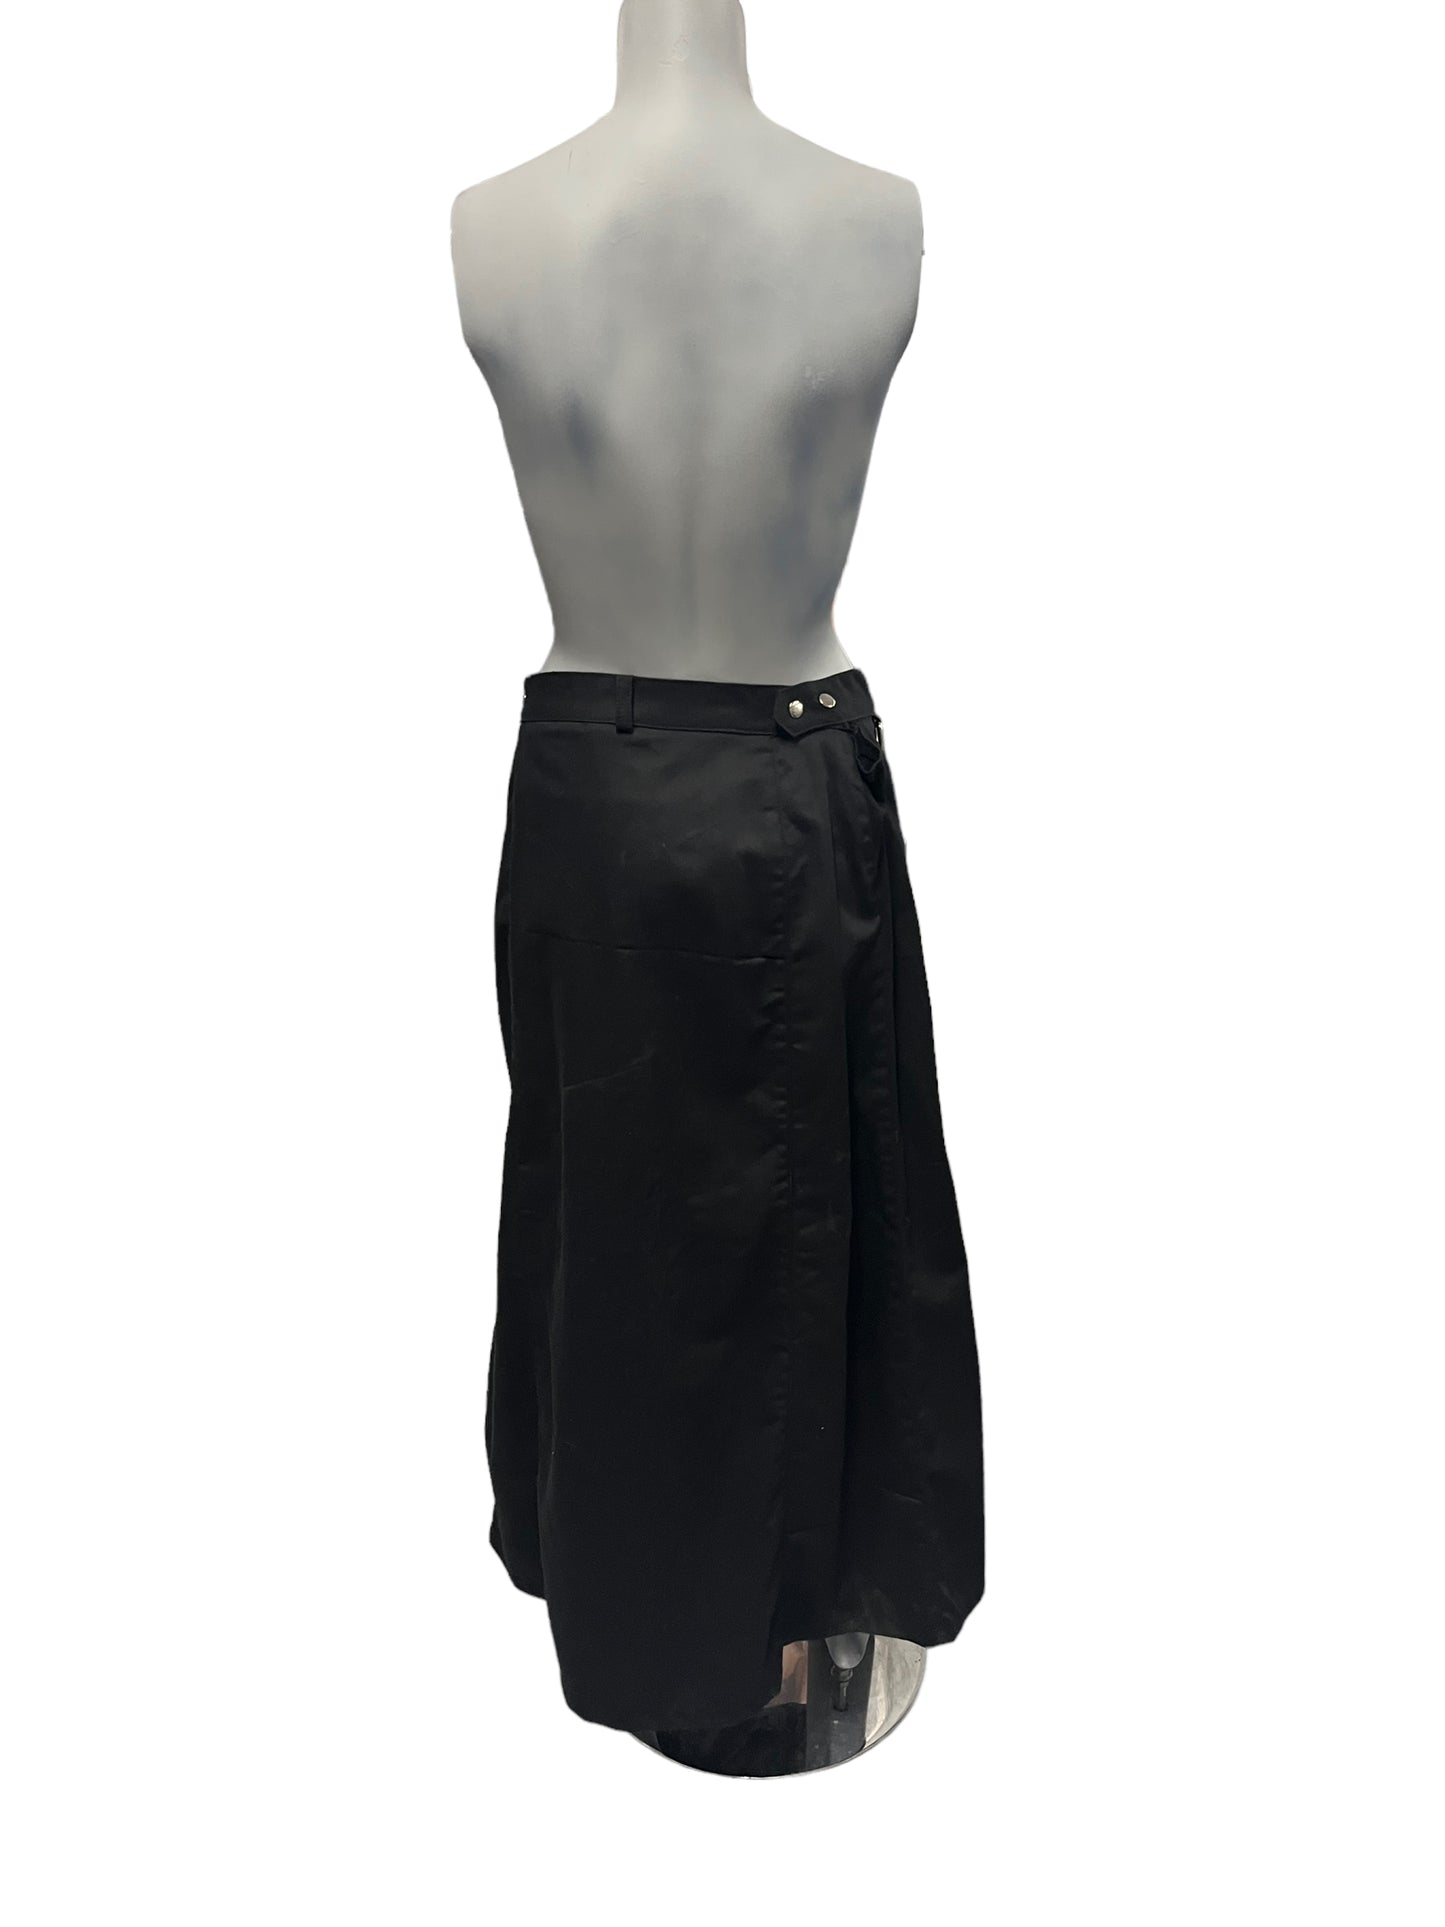 Fashion World - LL15 - Long Black Skirt with Buckle - Size S